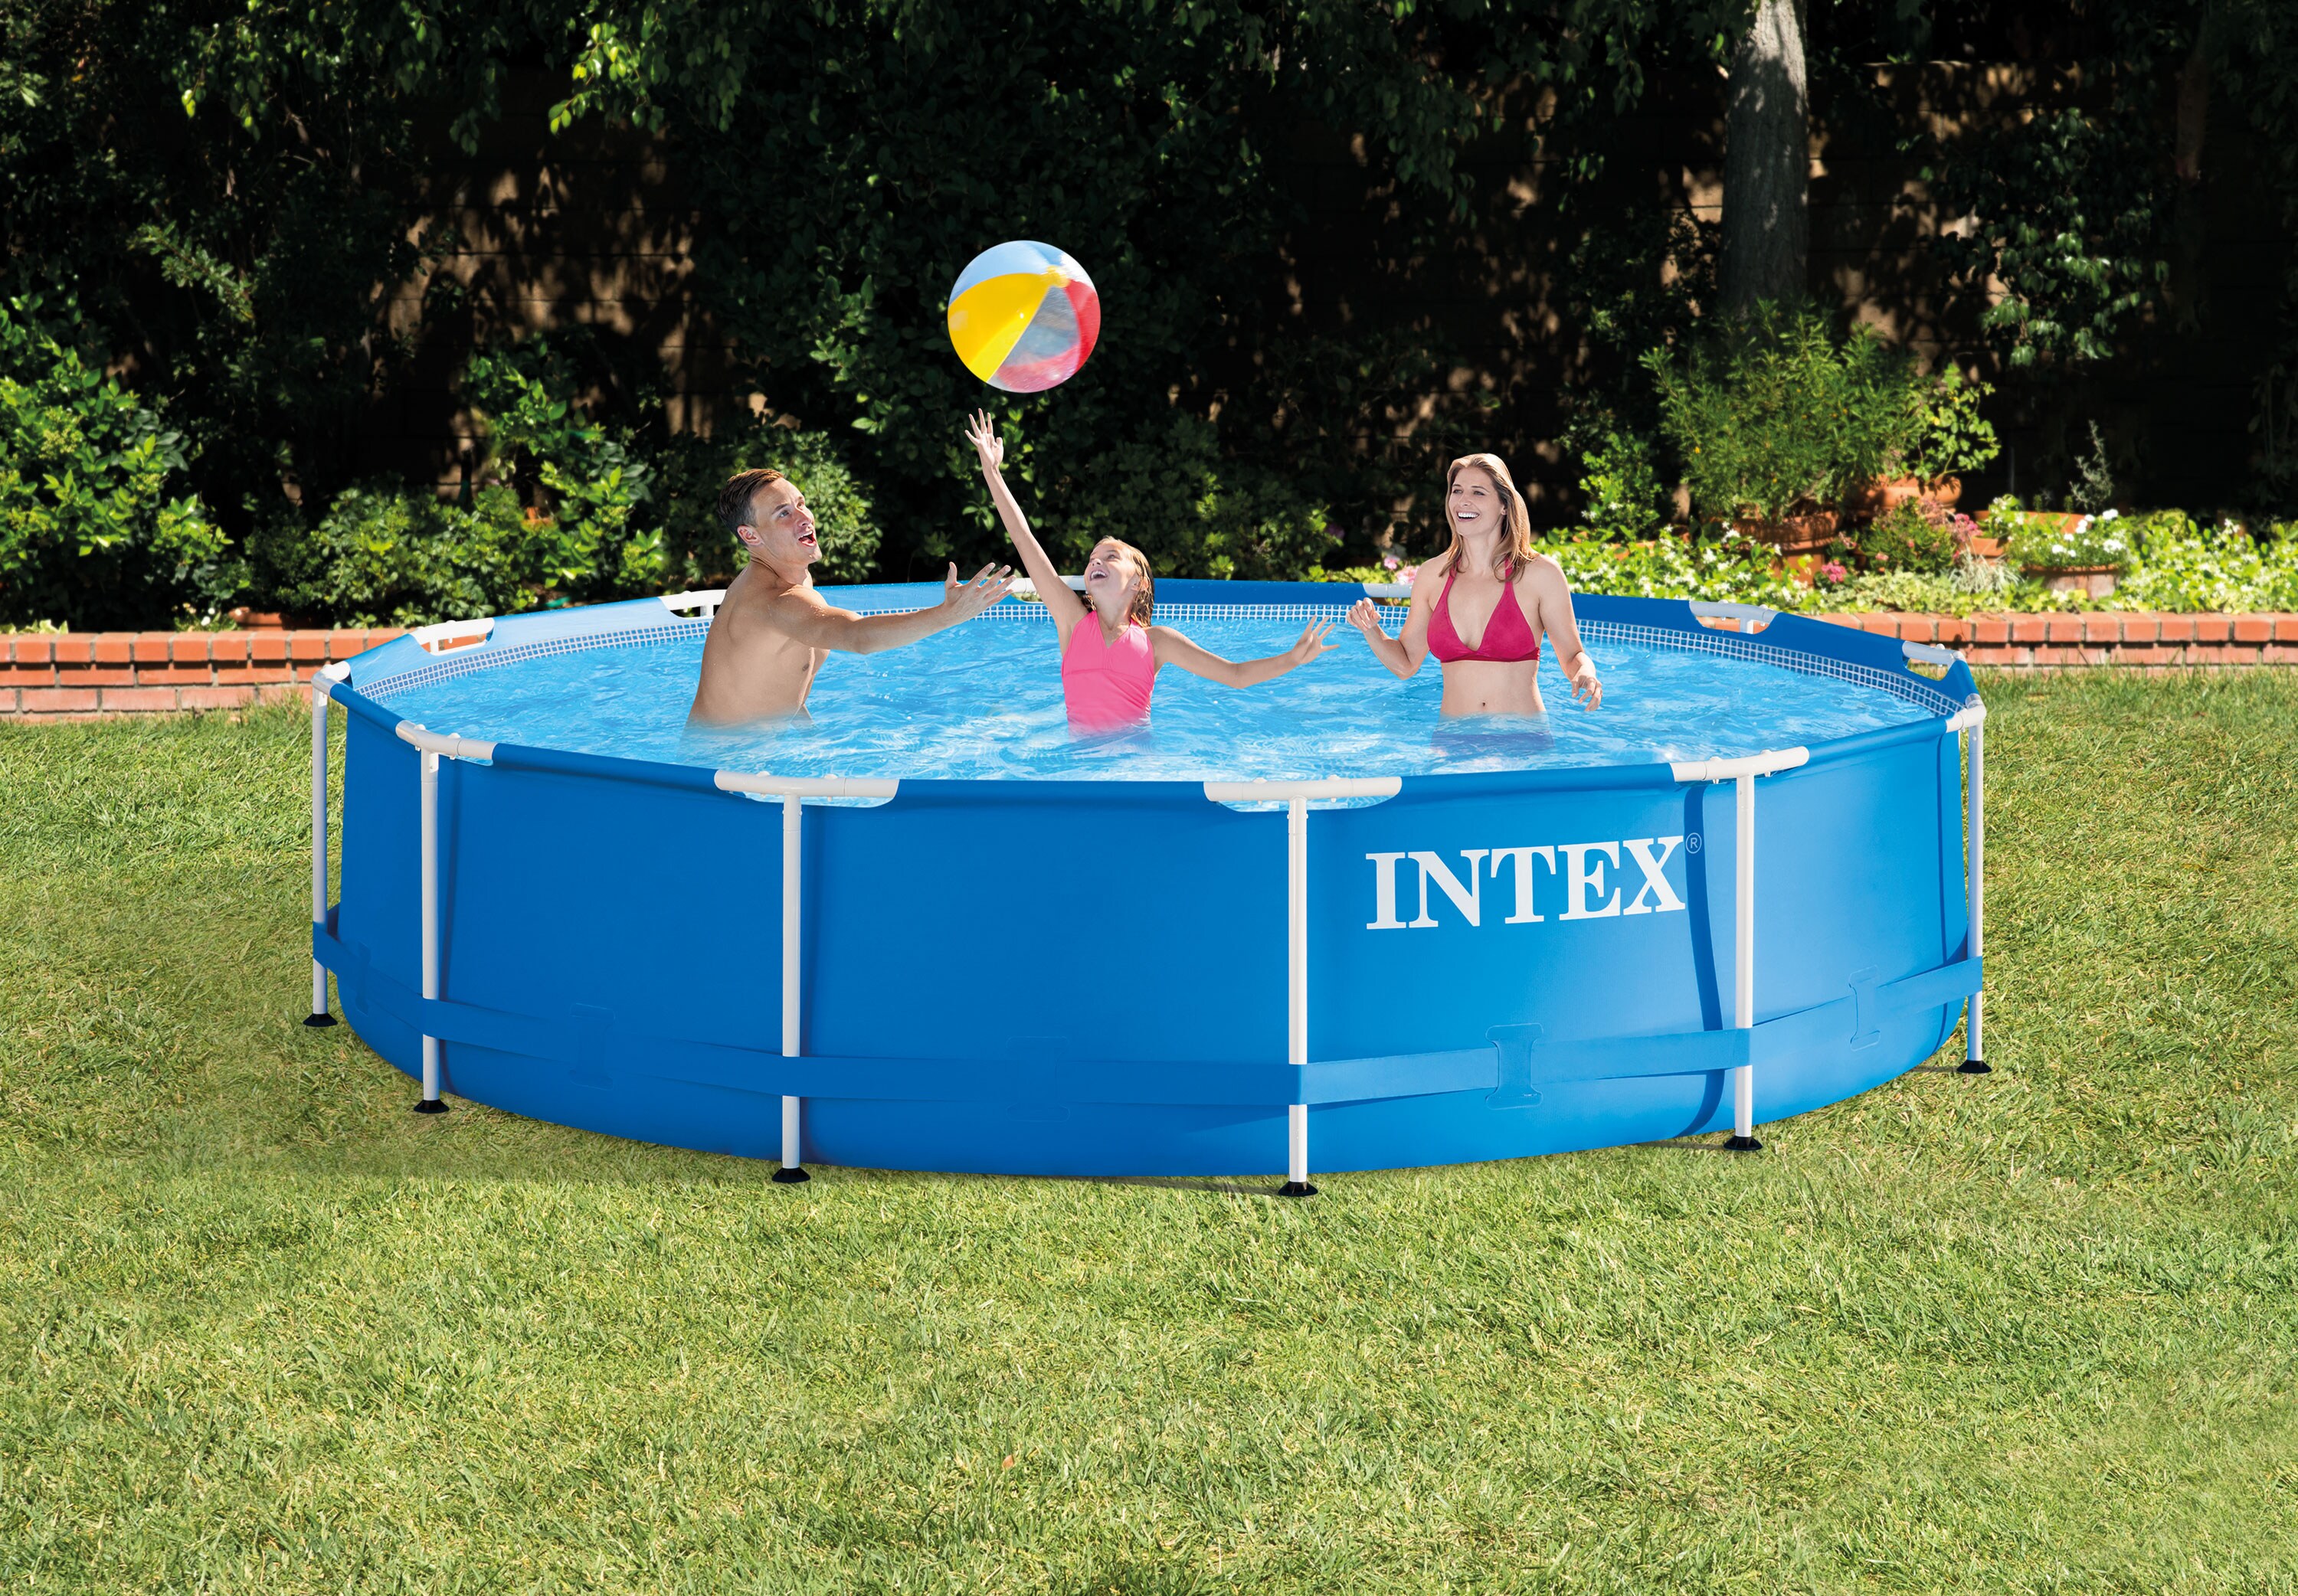 Intex 12' x 30" Metal Frame Set Above Ground Swimming Pool with Filter & Cover 